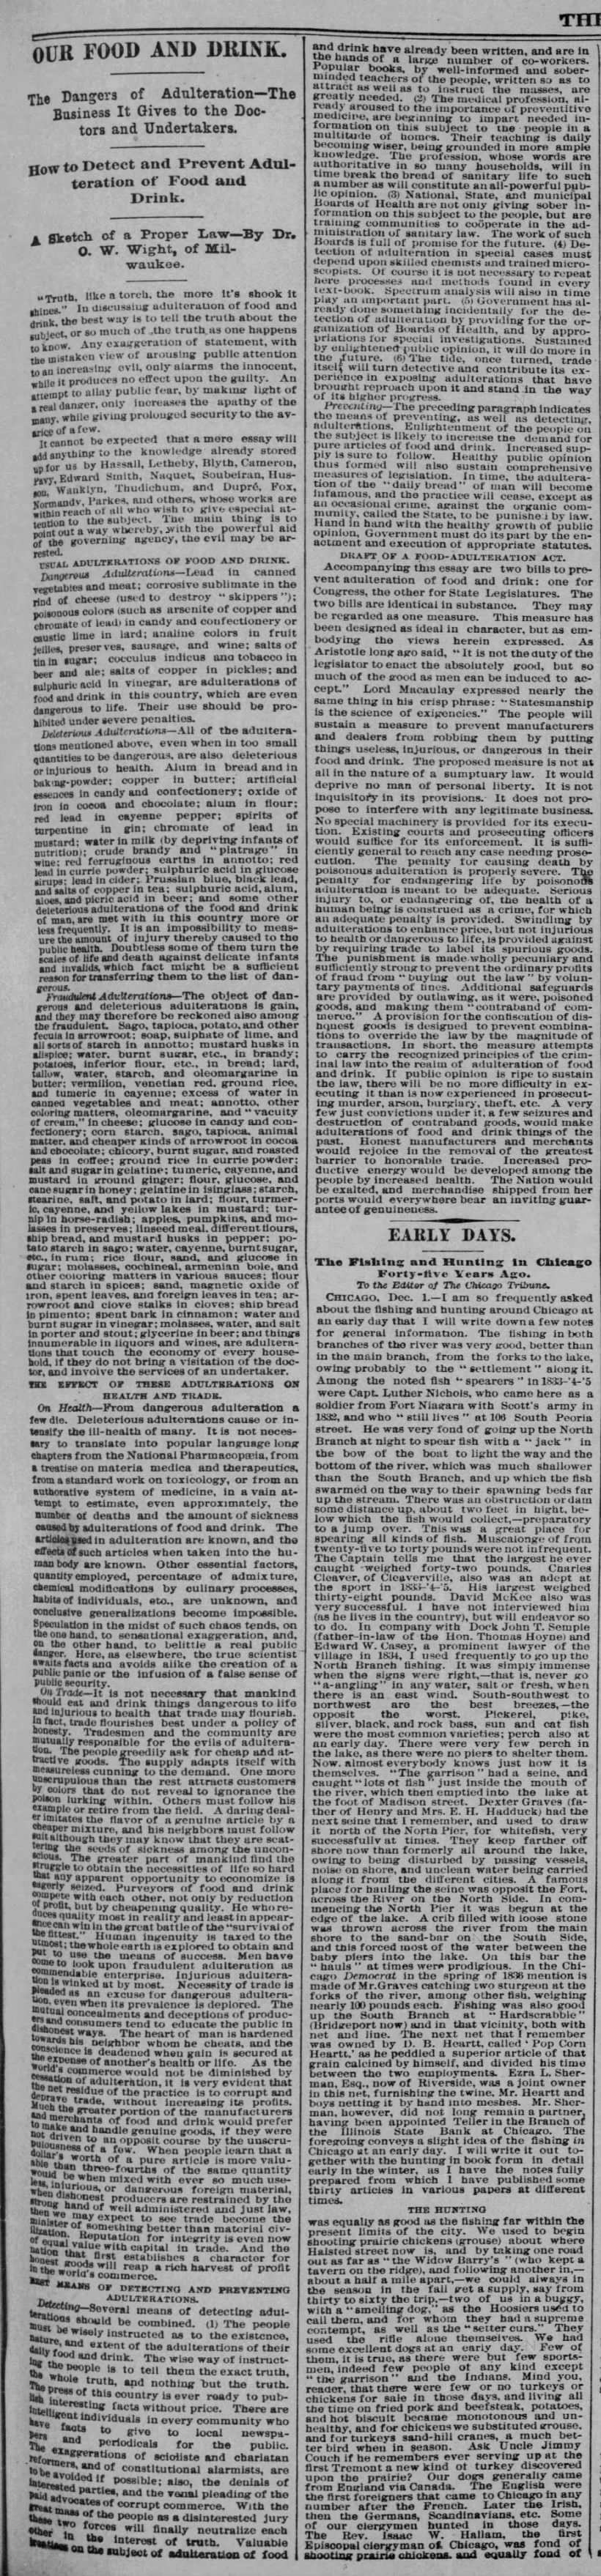 1880 article about food adulteration